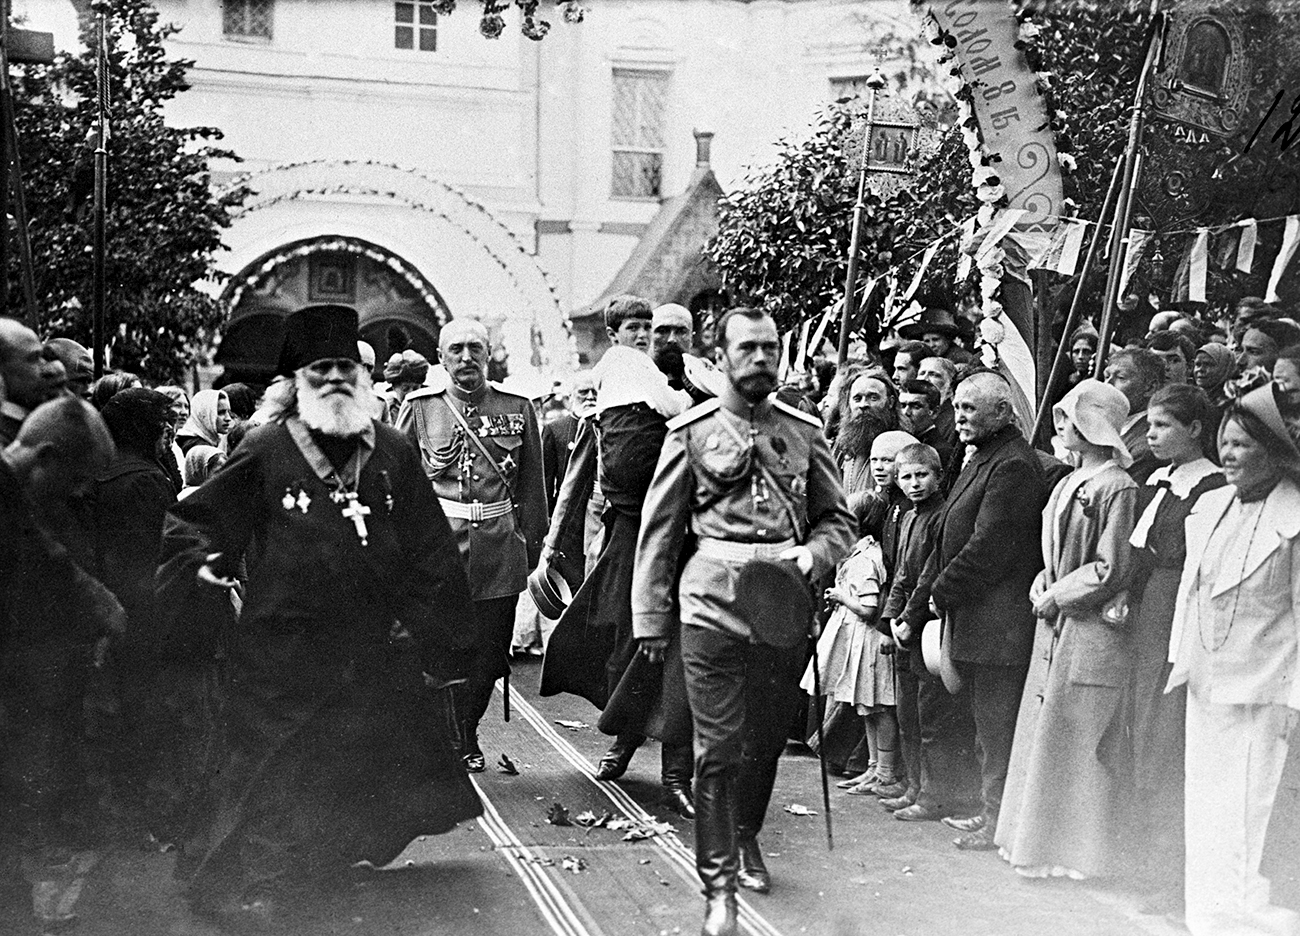 Emperor Nicholas II and Crown Prince Alexis, in the background, carried by a Cossack attendant, 1913. / RIA Novosti